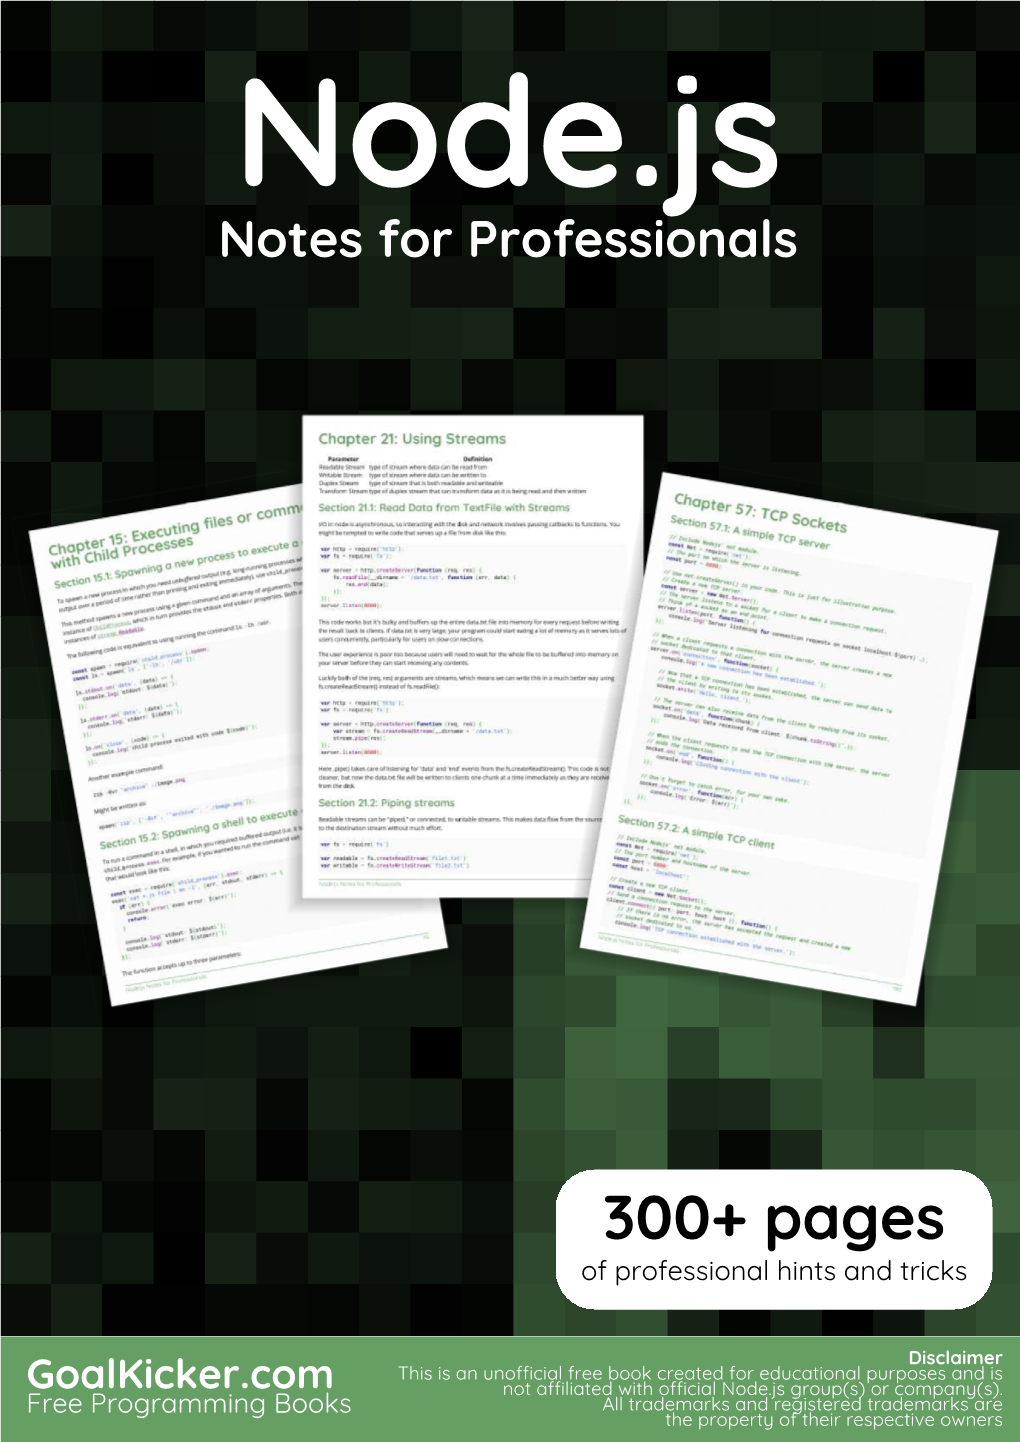 Node.Js Notes for Professionals Book Is Compiled from Stack Overﬂow Documentation, the Content Is Written by the Beautiful People at Stack Overﬂow